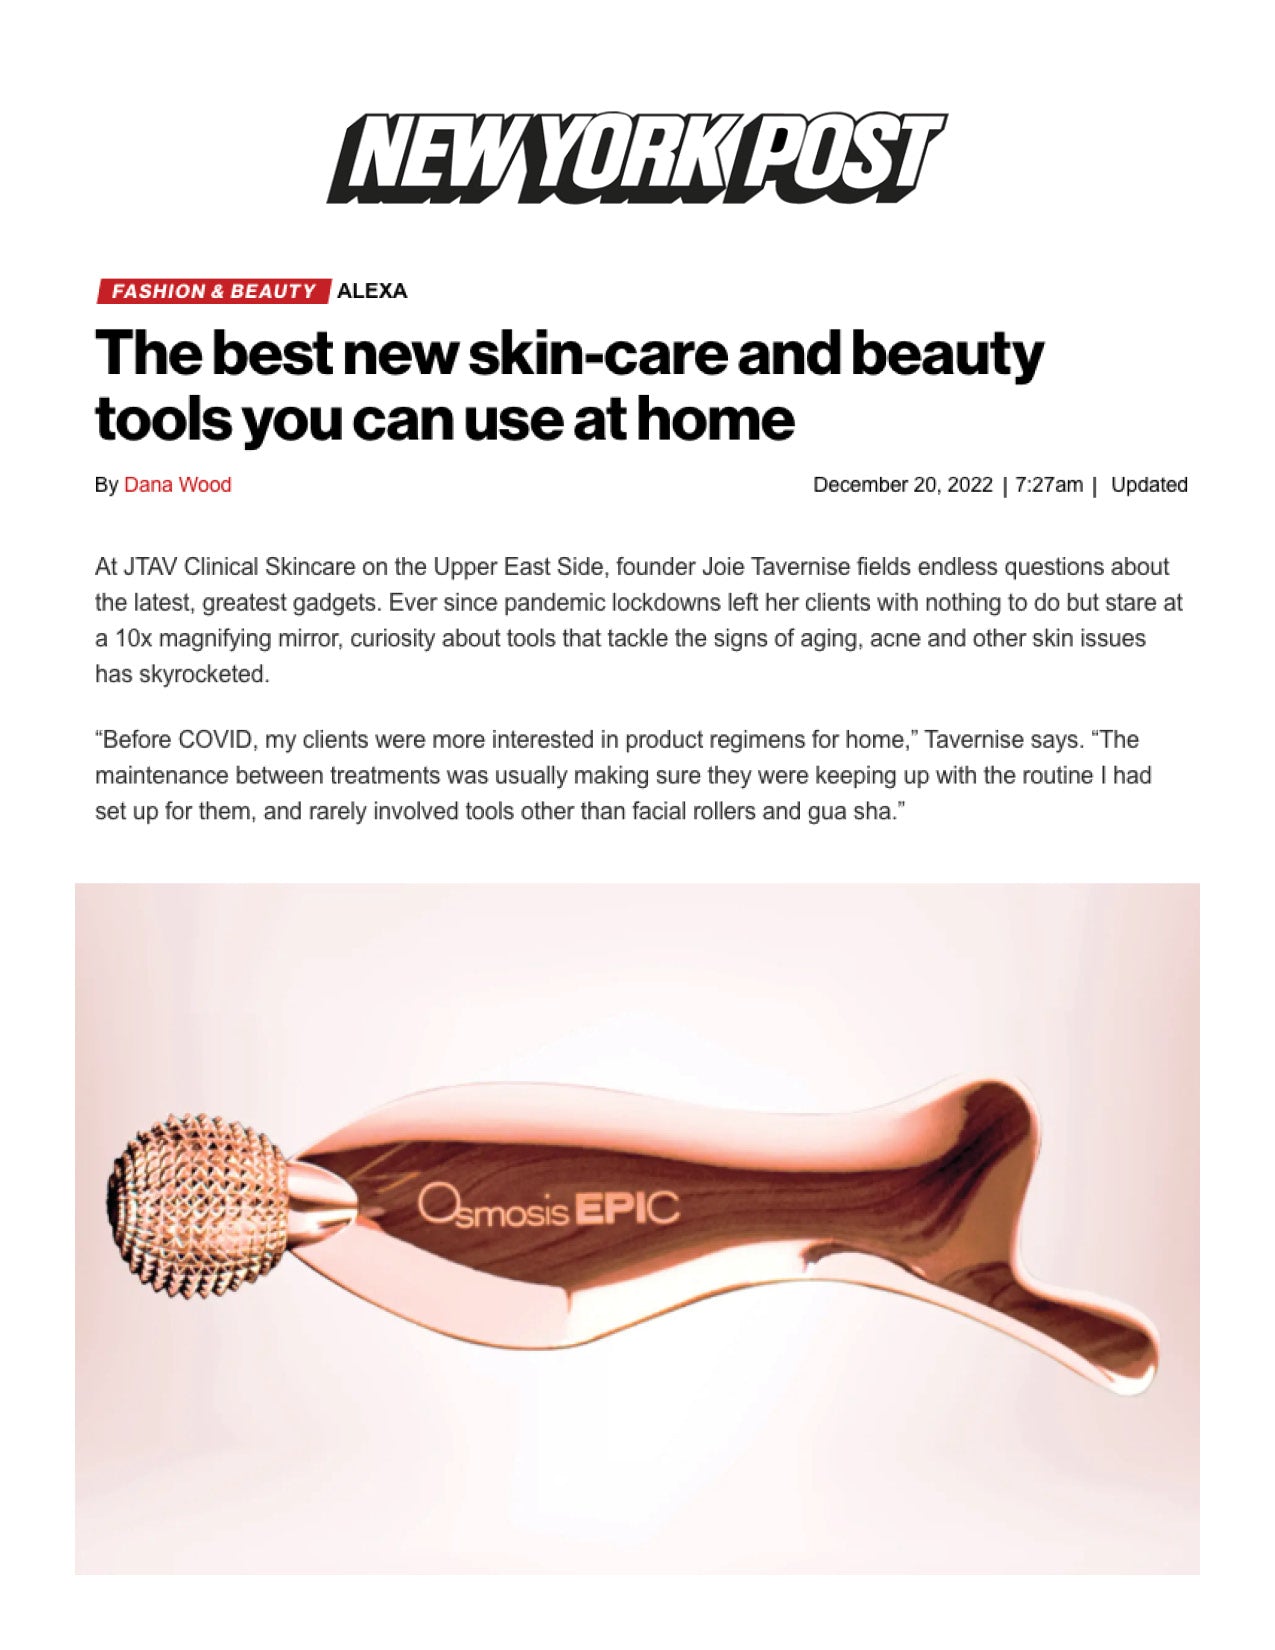 New York Post featured the Osmosis EPIC Duo Skin Tool in a story titled The Best New Skin and Beauty Tools you can use at home